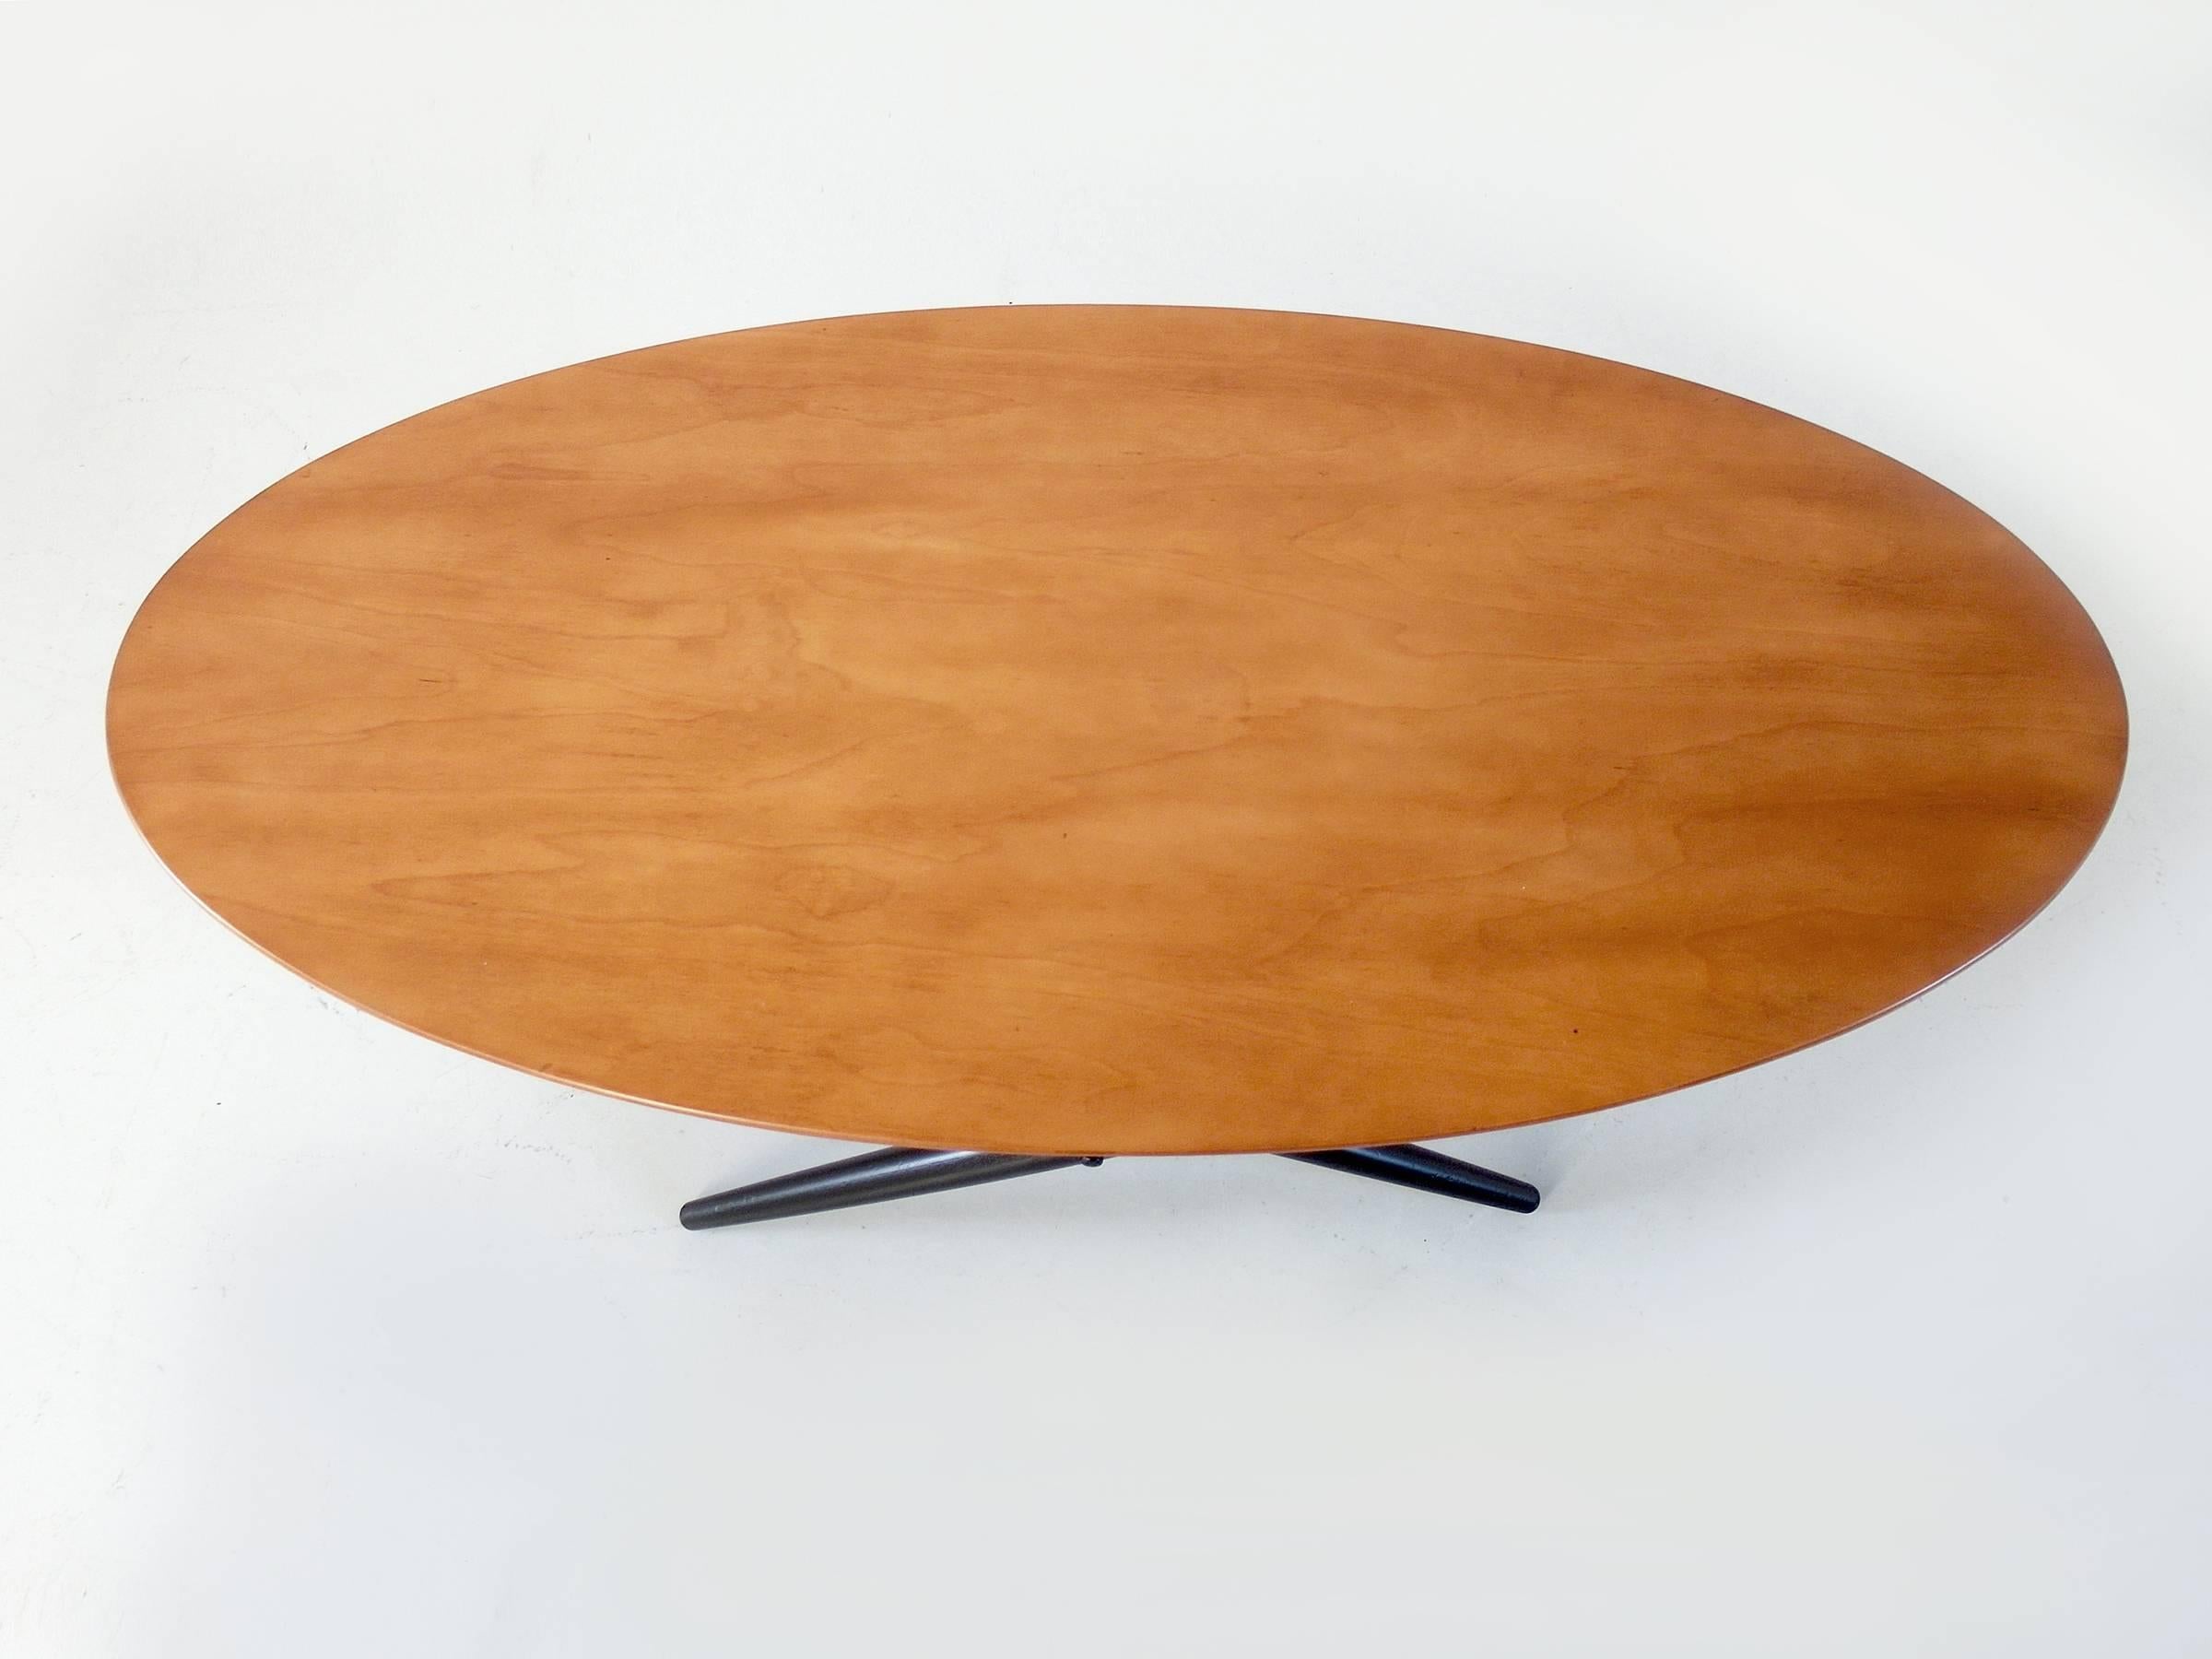 Early Ilmari Tapiovaara 'Ovalette' Coffee Table for Asko Oy Lahti, Finland, 1953 In Good Condition For Sale In Woudrichem, NL